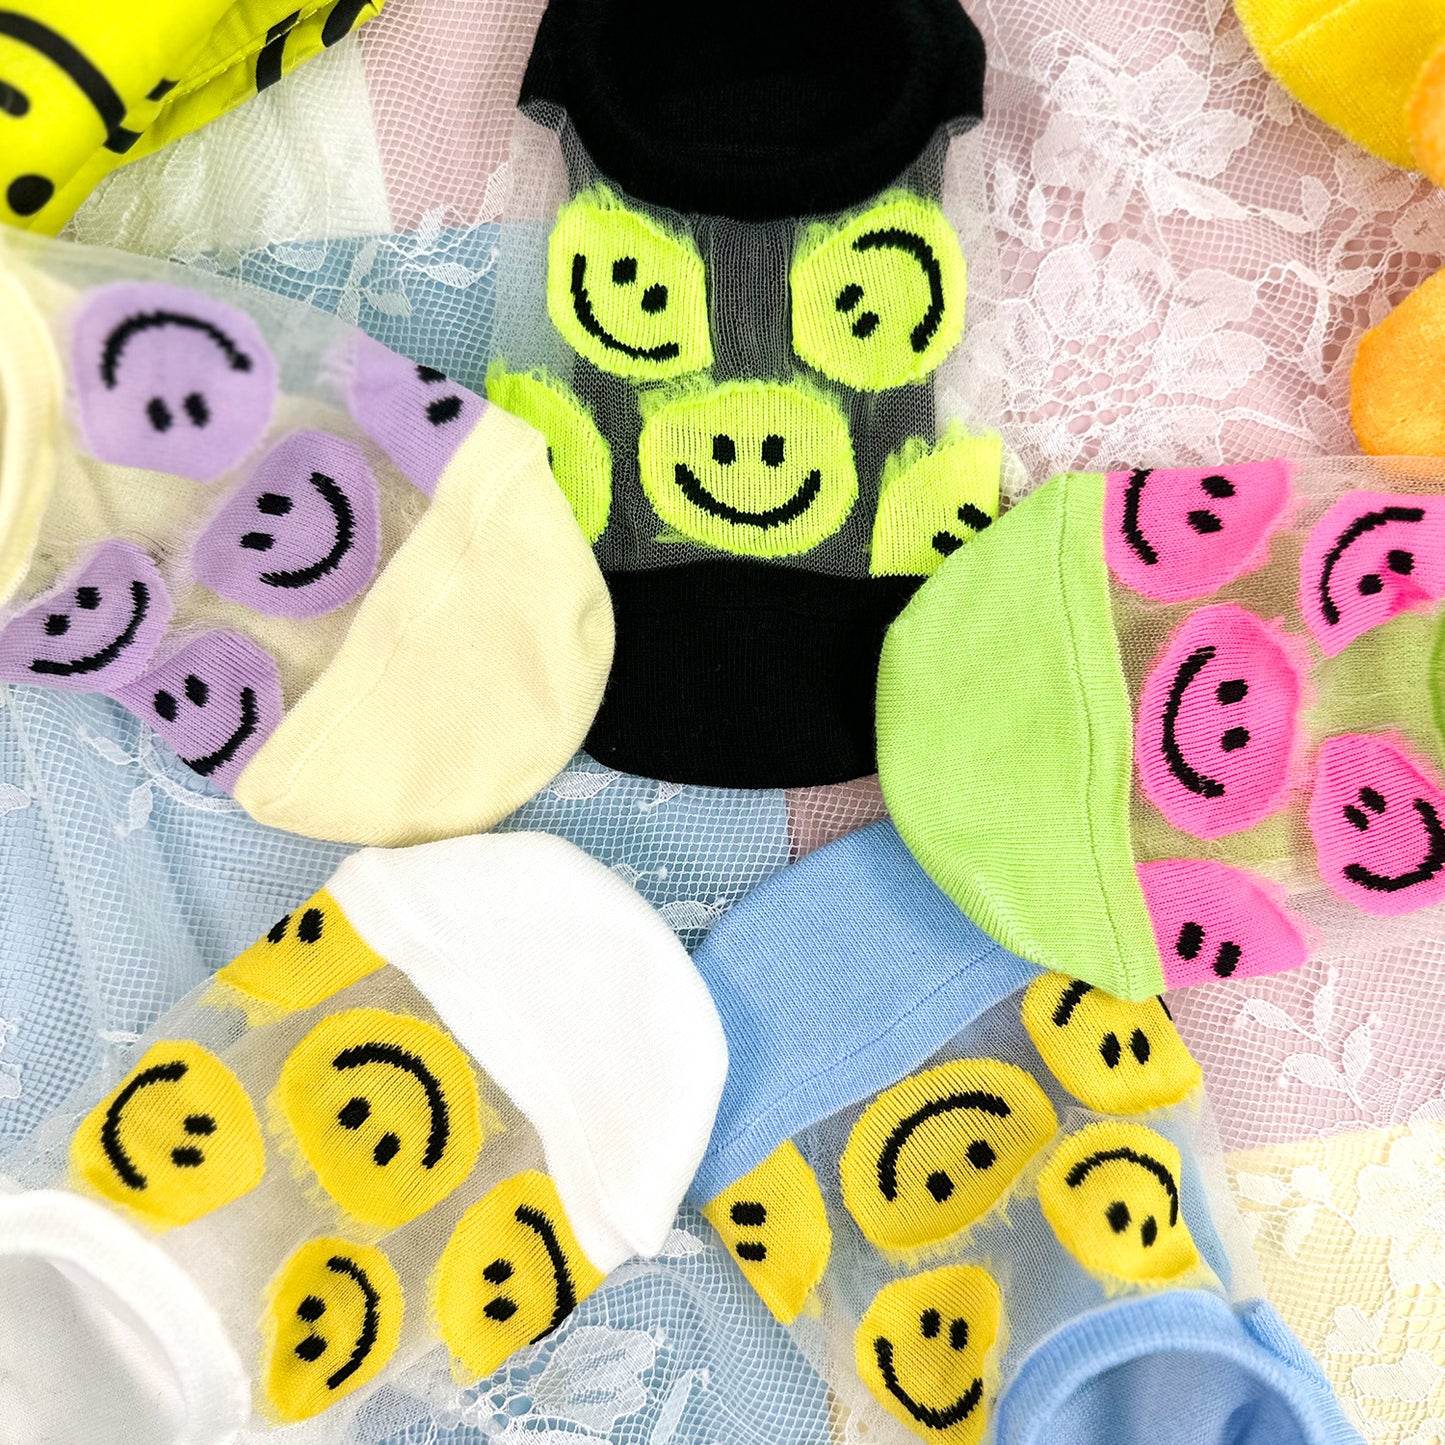 Women's No Show See-Through Popping Smile Socks